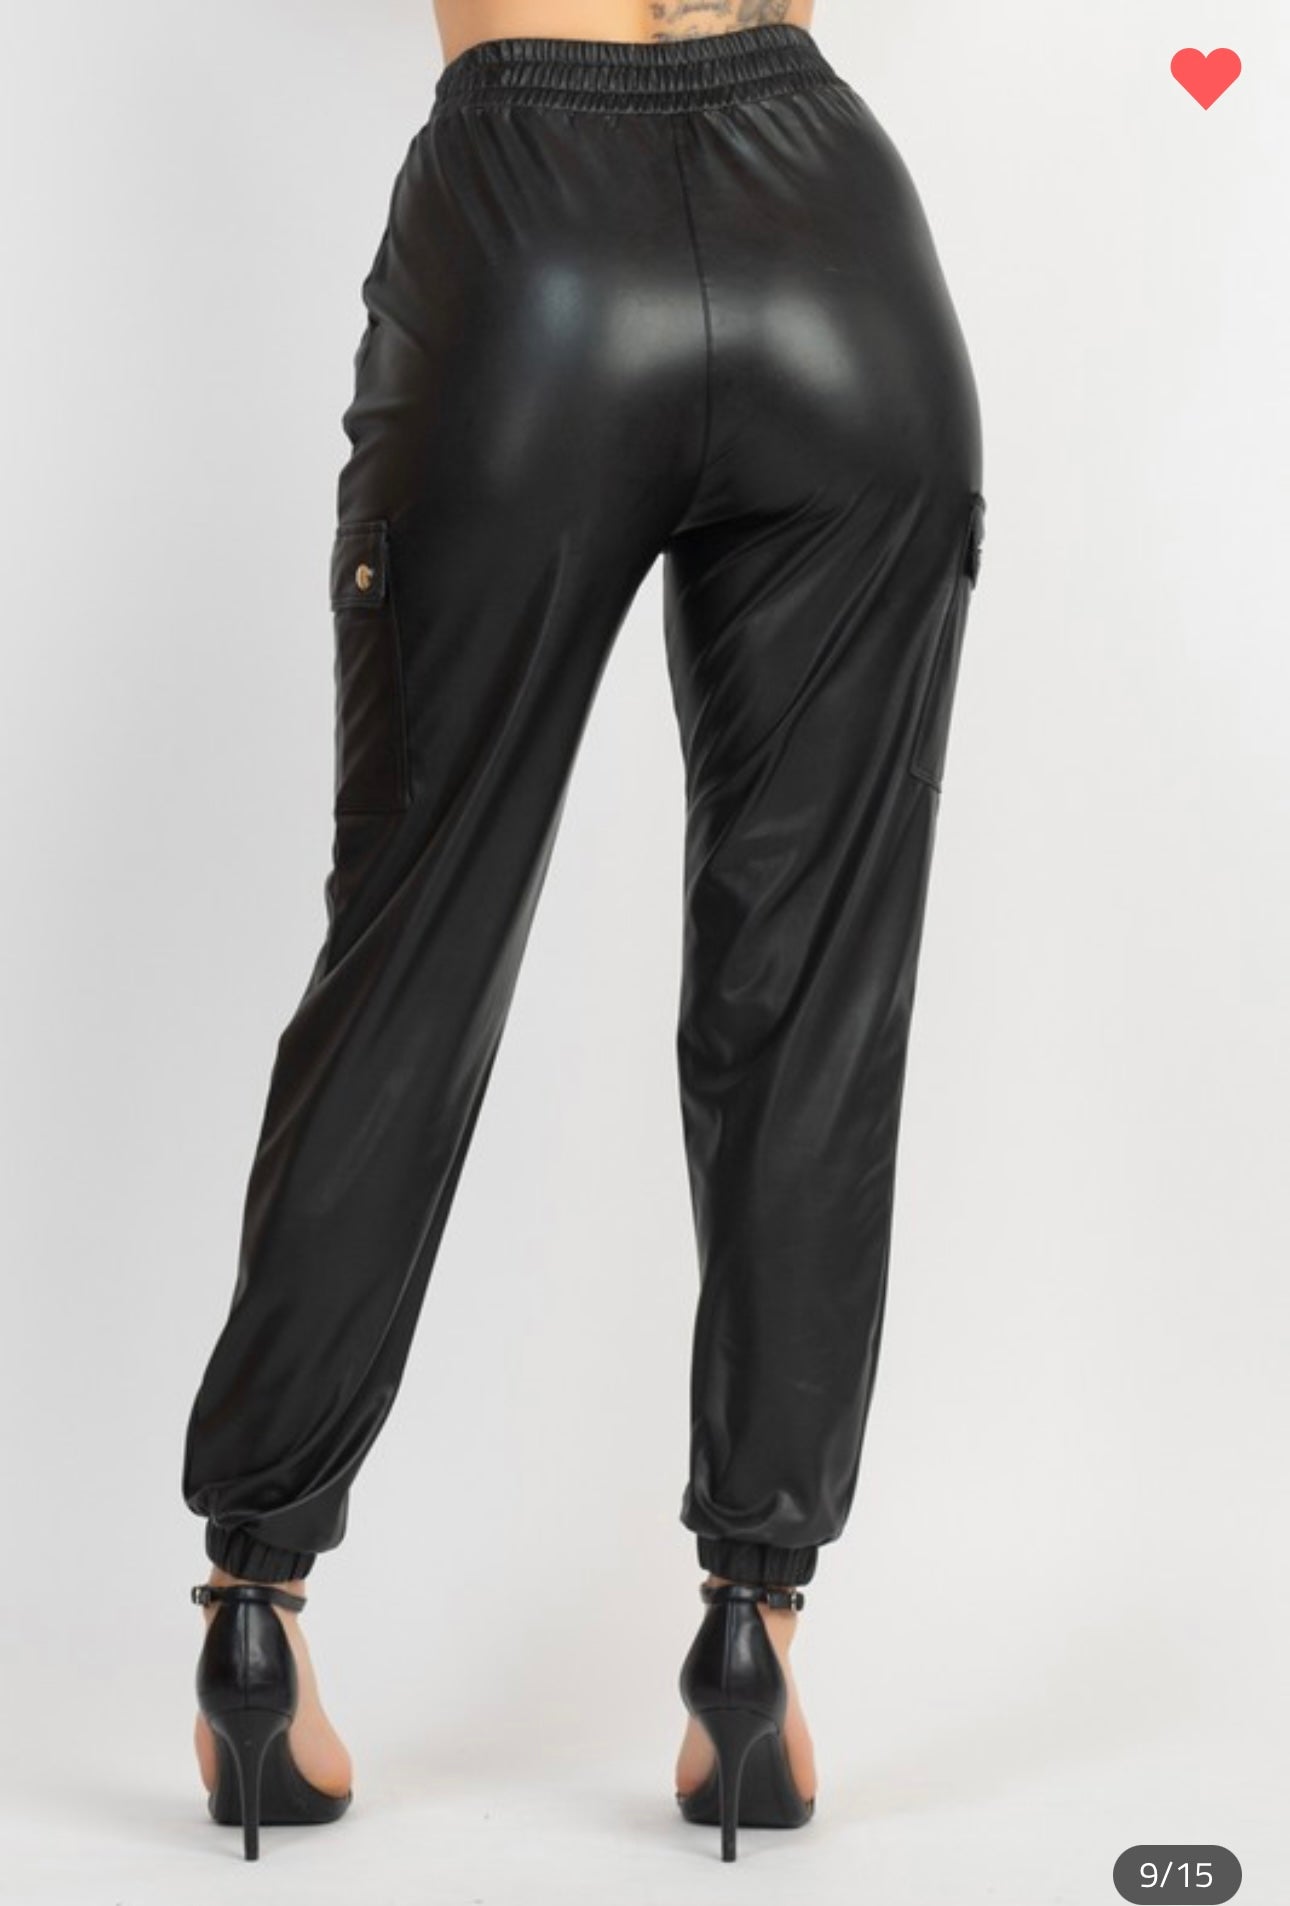 Joselyn Leather Boogie pants